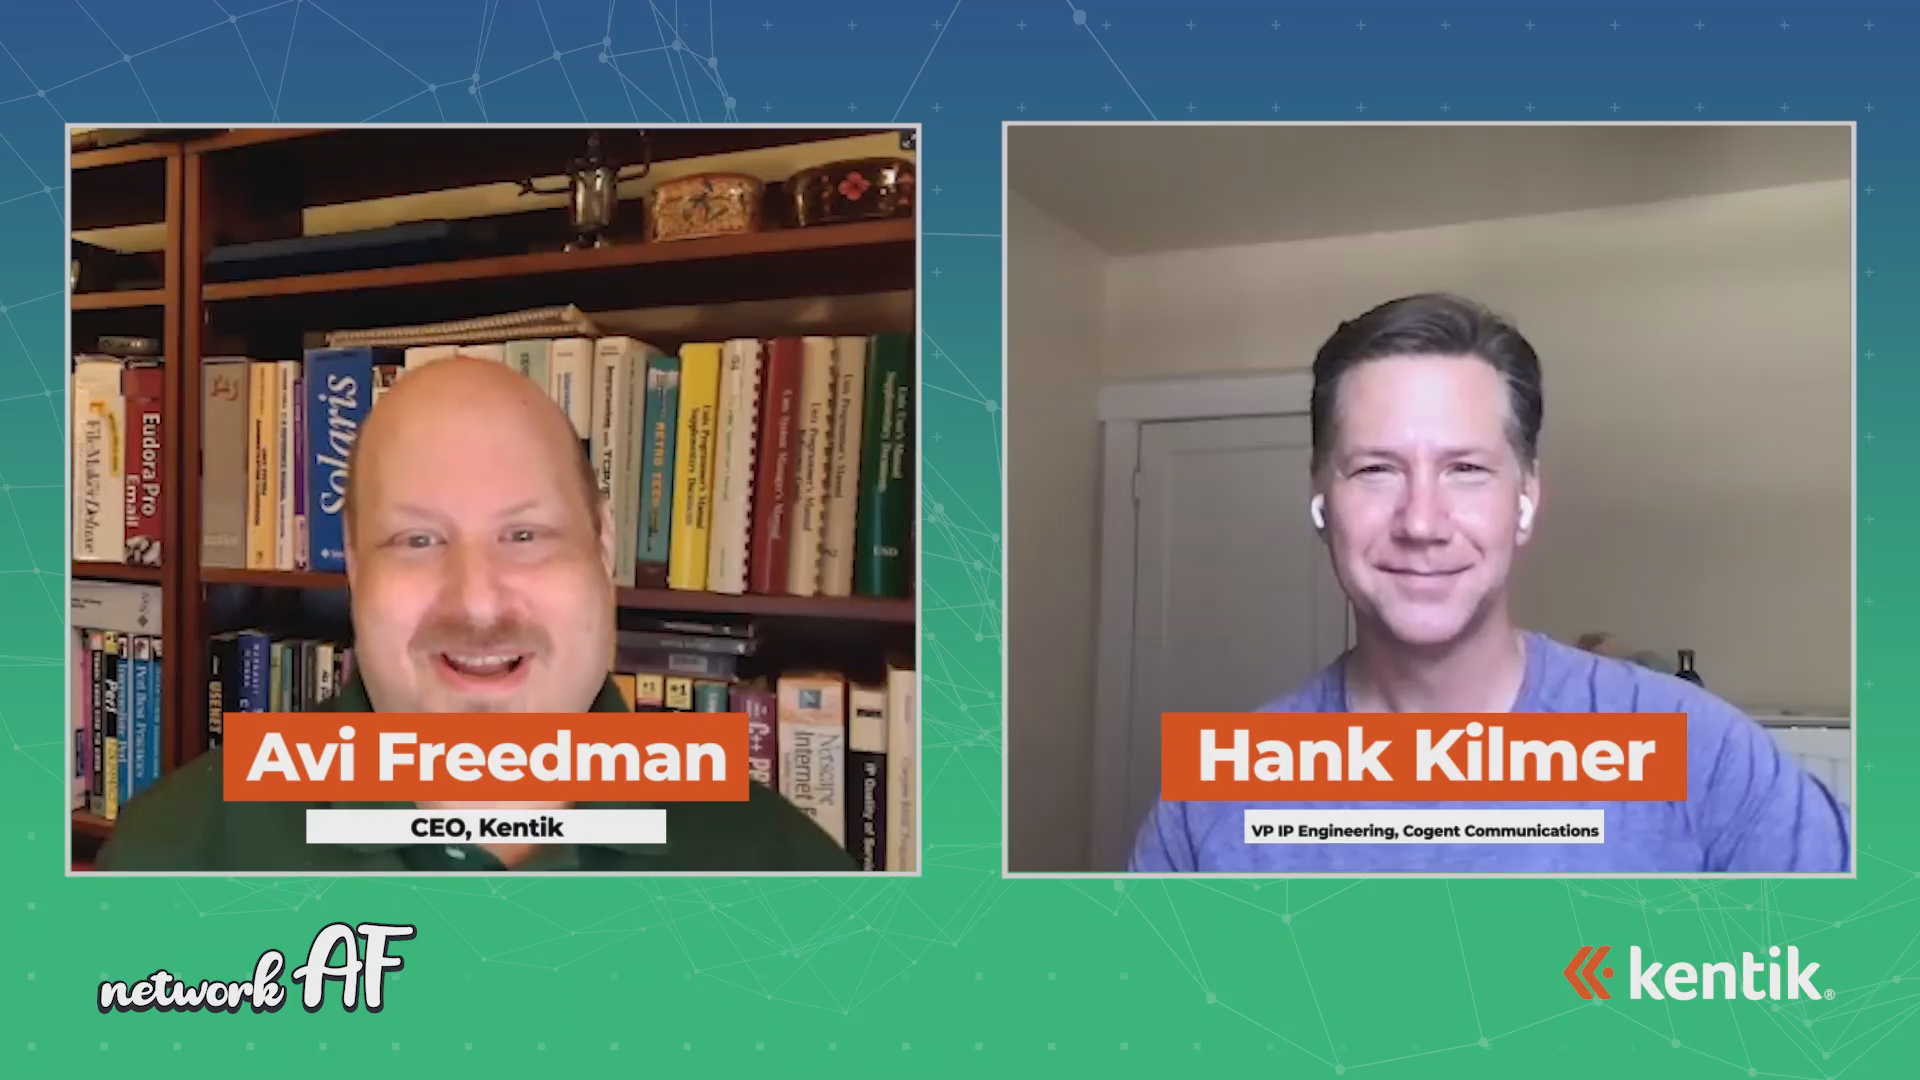 Networks and interconnectivity with Hank Kilmer